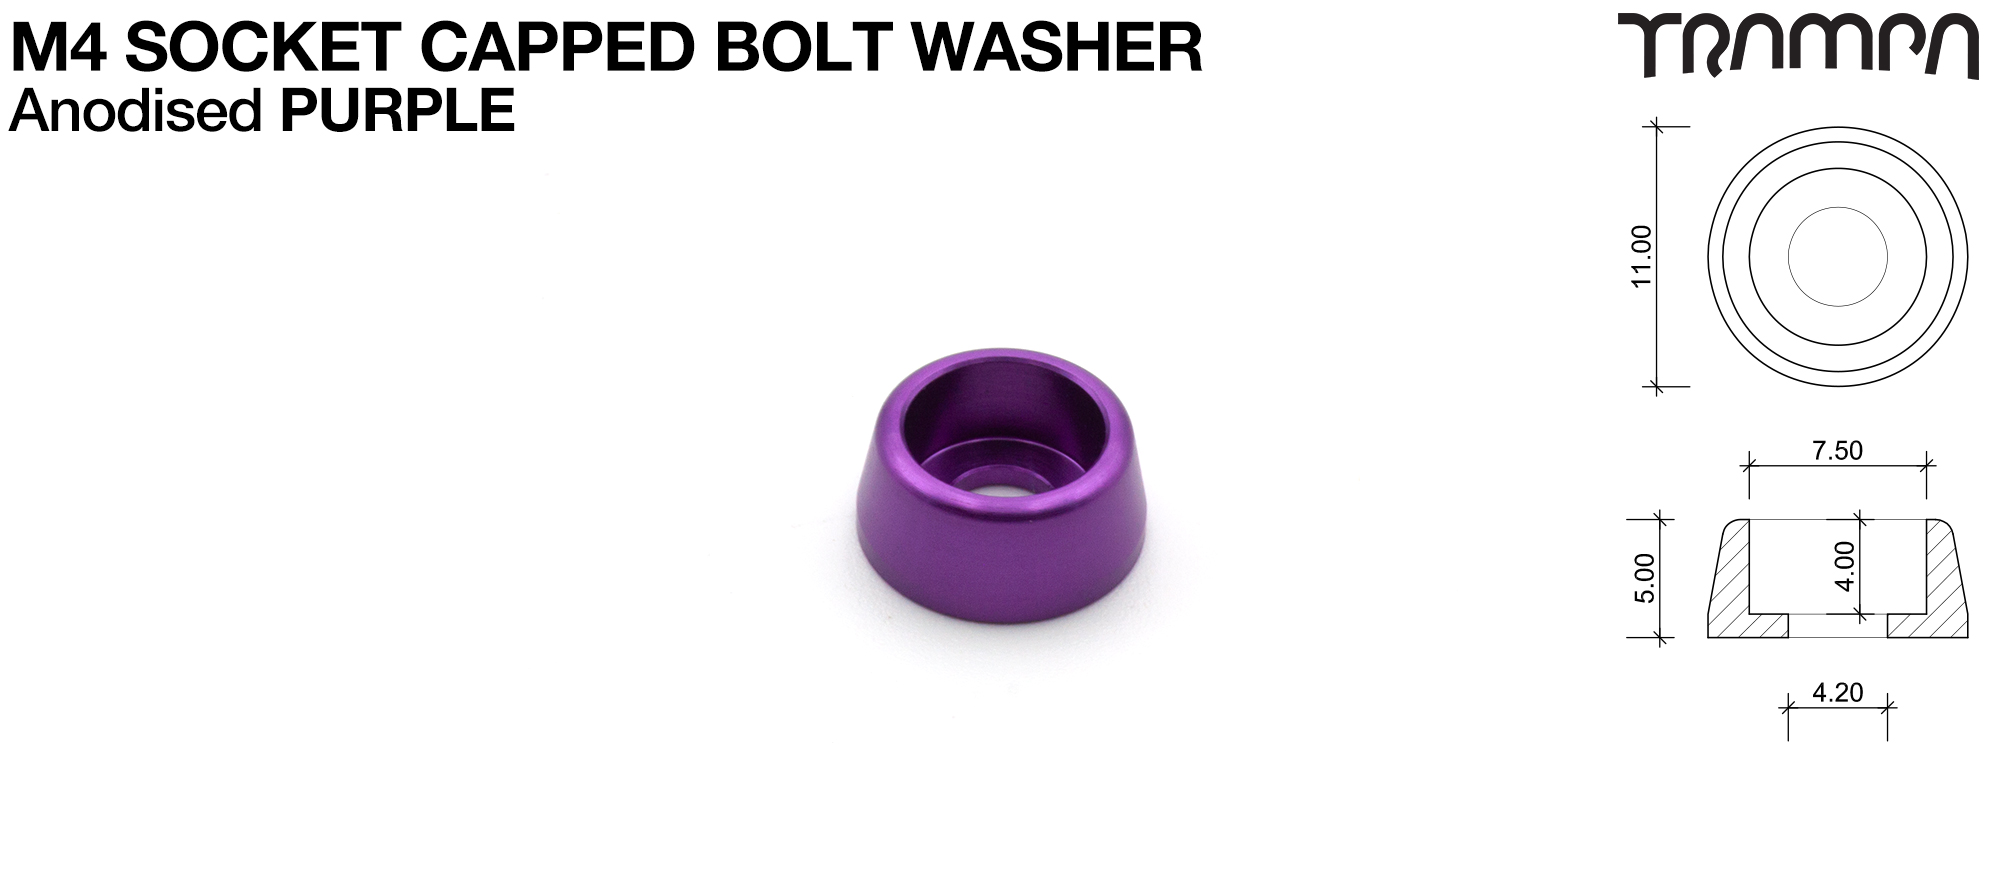 M4 Socket Capped Washer - Anodised PURPLE